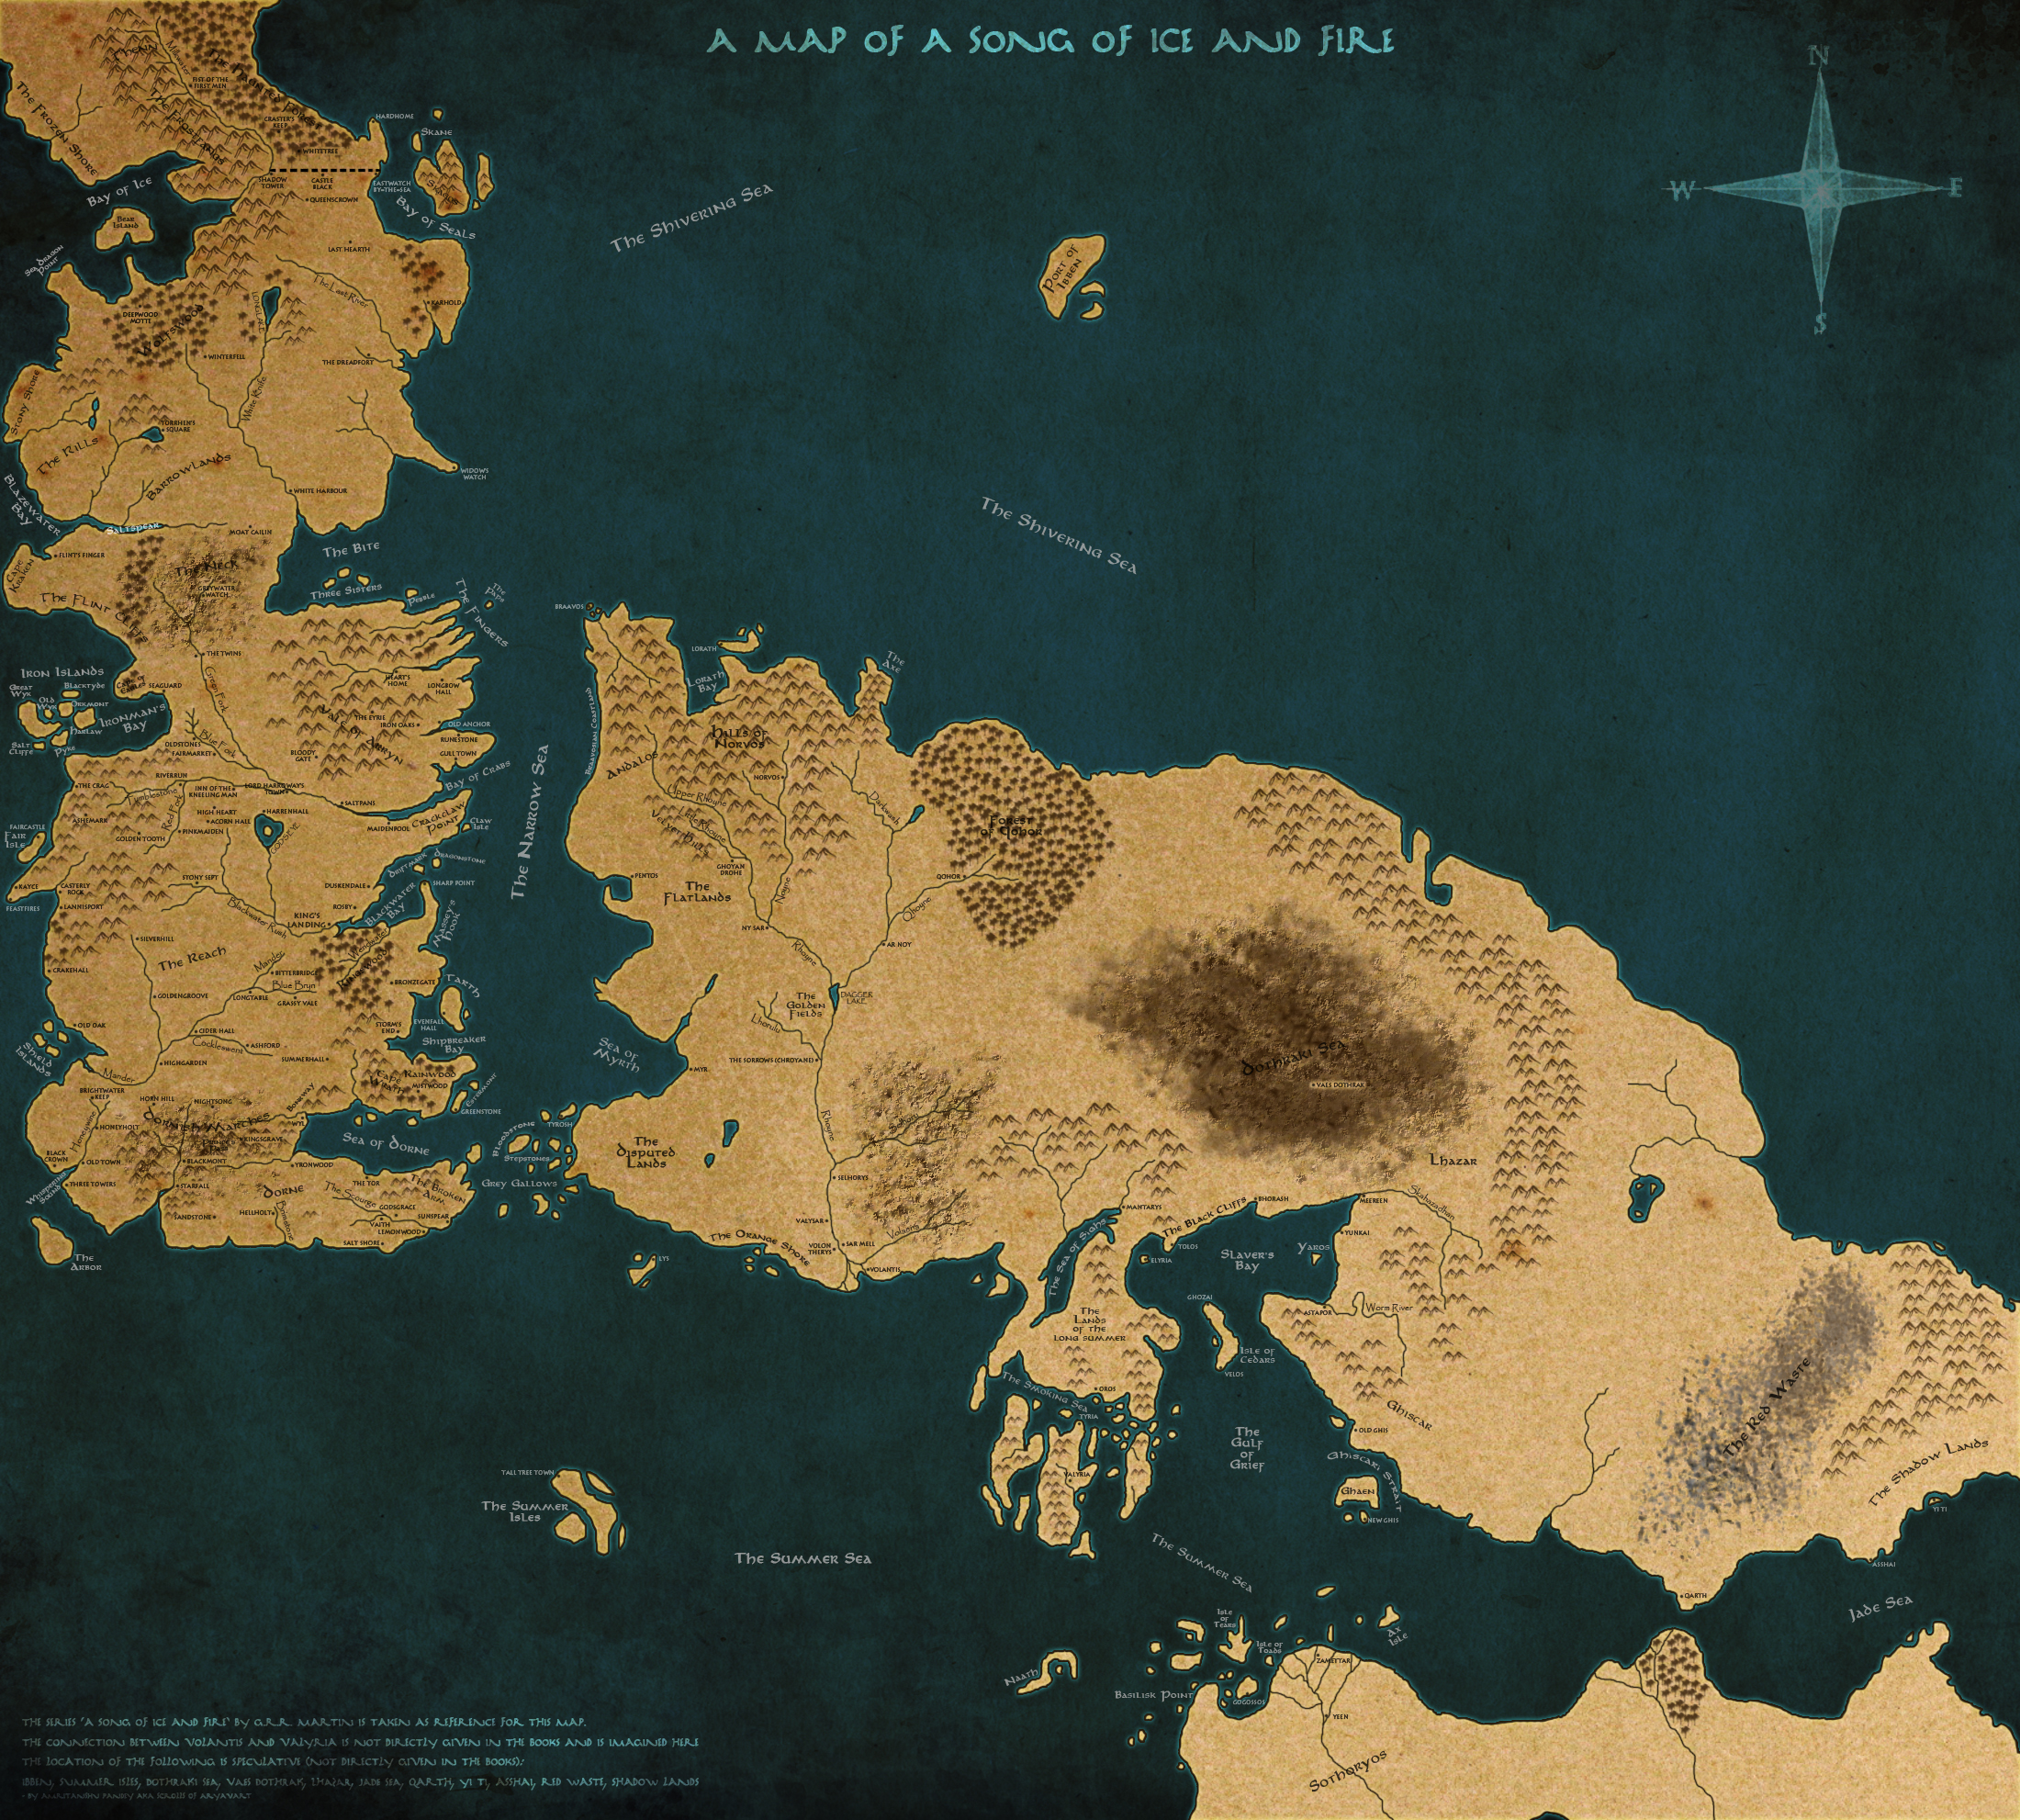 a-map-of-a-song-of-ice-and-fire-version-2-by-scrollsofaryavart-on